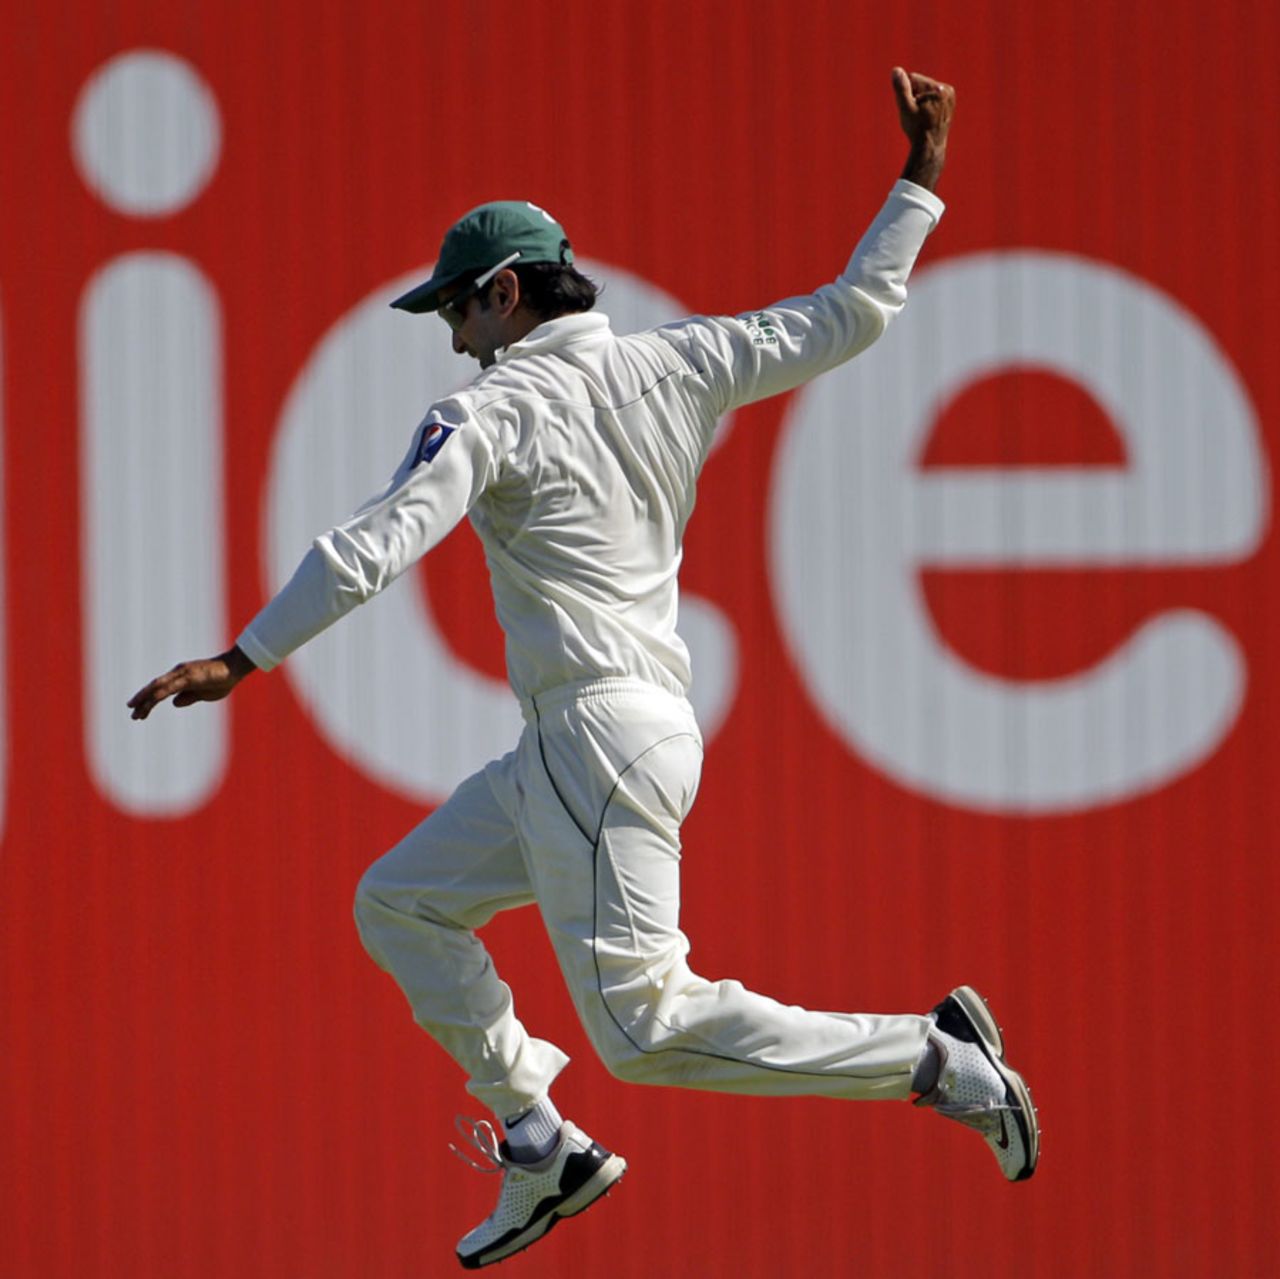 Mohammad Hafeez celebrates catching Lendl Simmons, West Indies v Pakistan, 2nd Test, St Kitts, 4th day, May 23, 2011